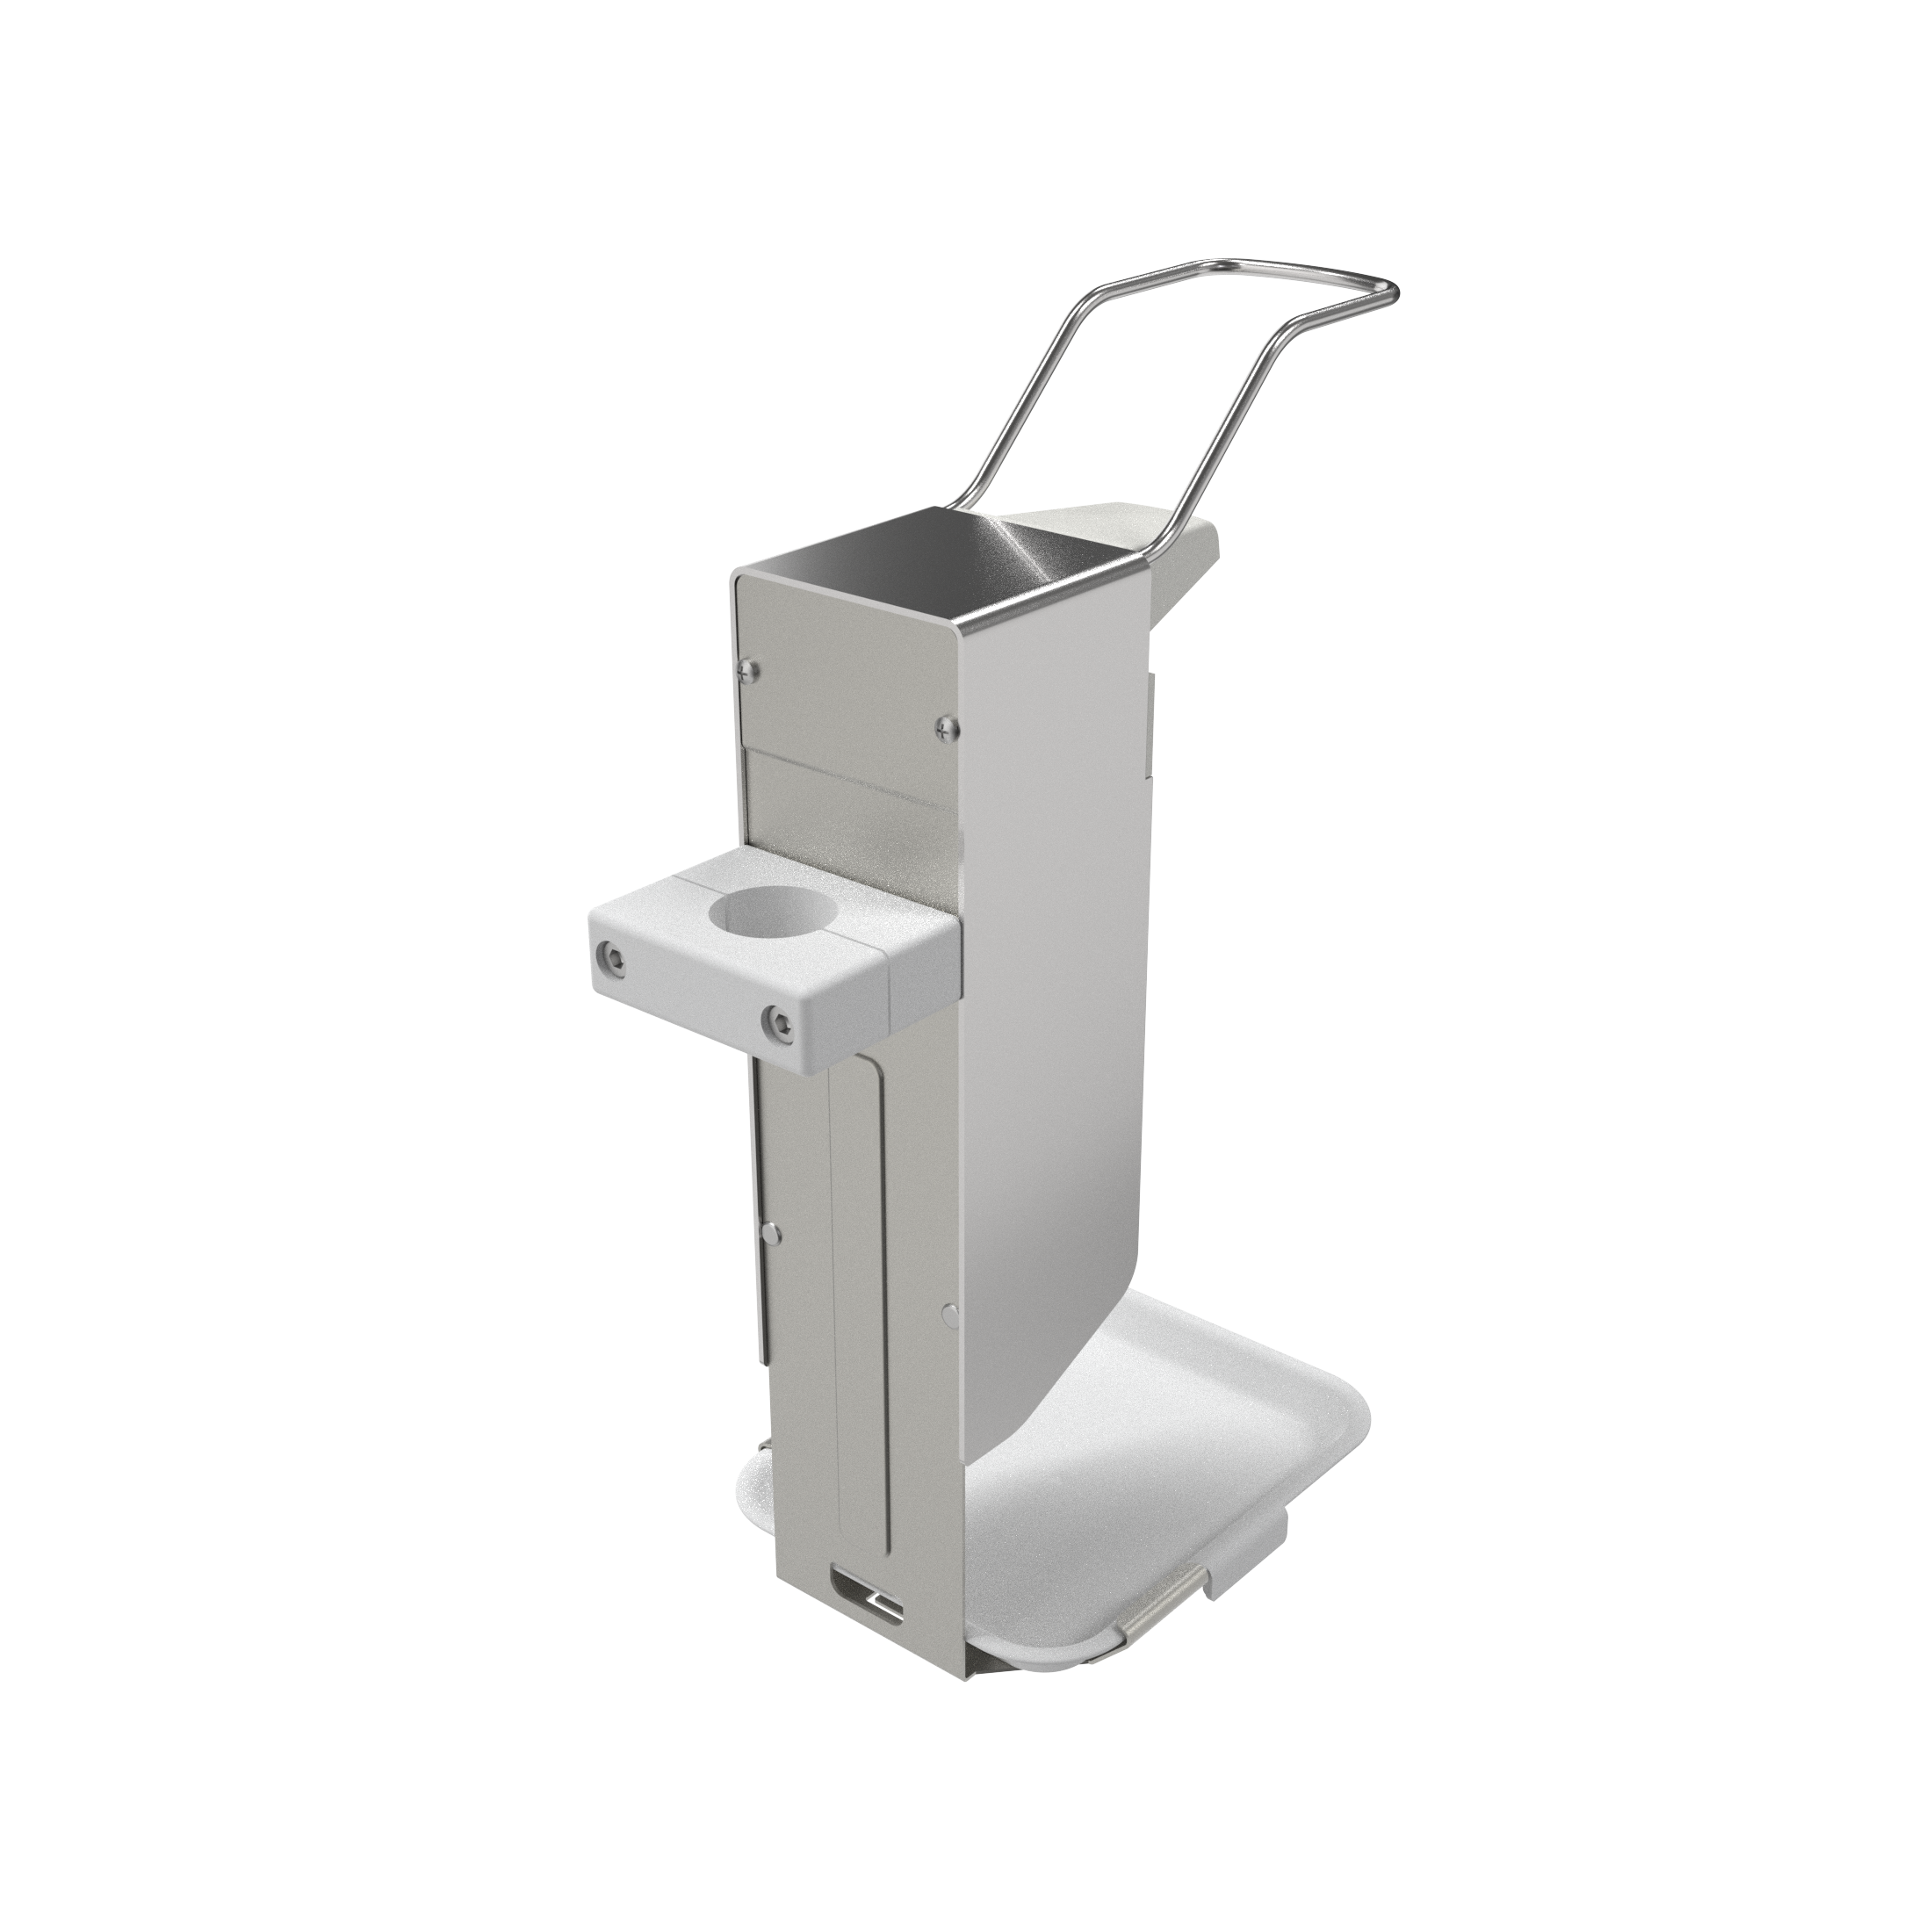 Disinfectant dispenser with drip tray